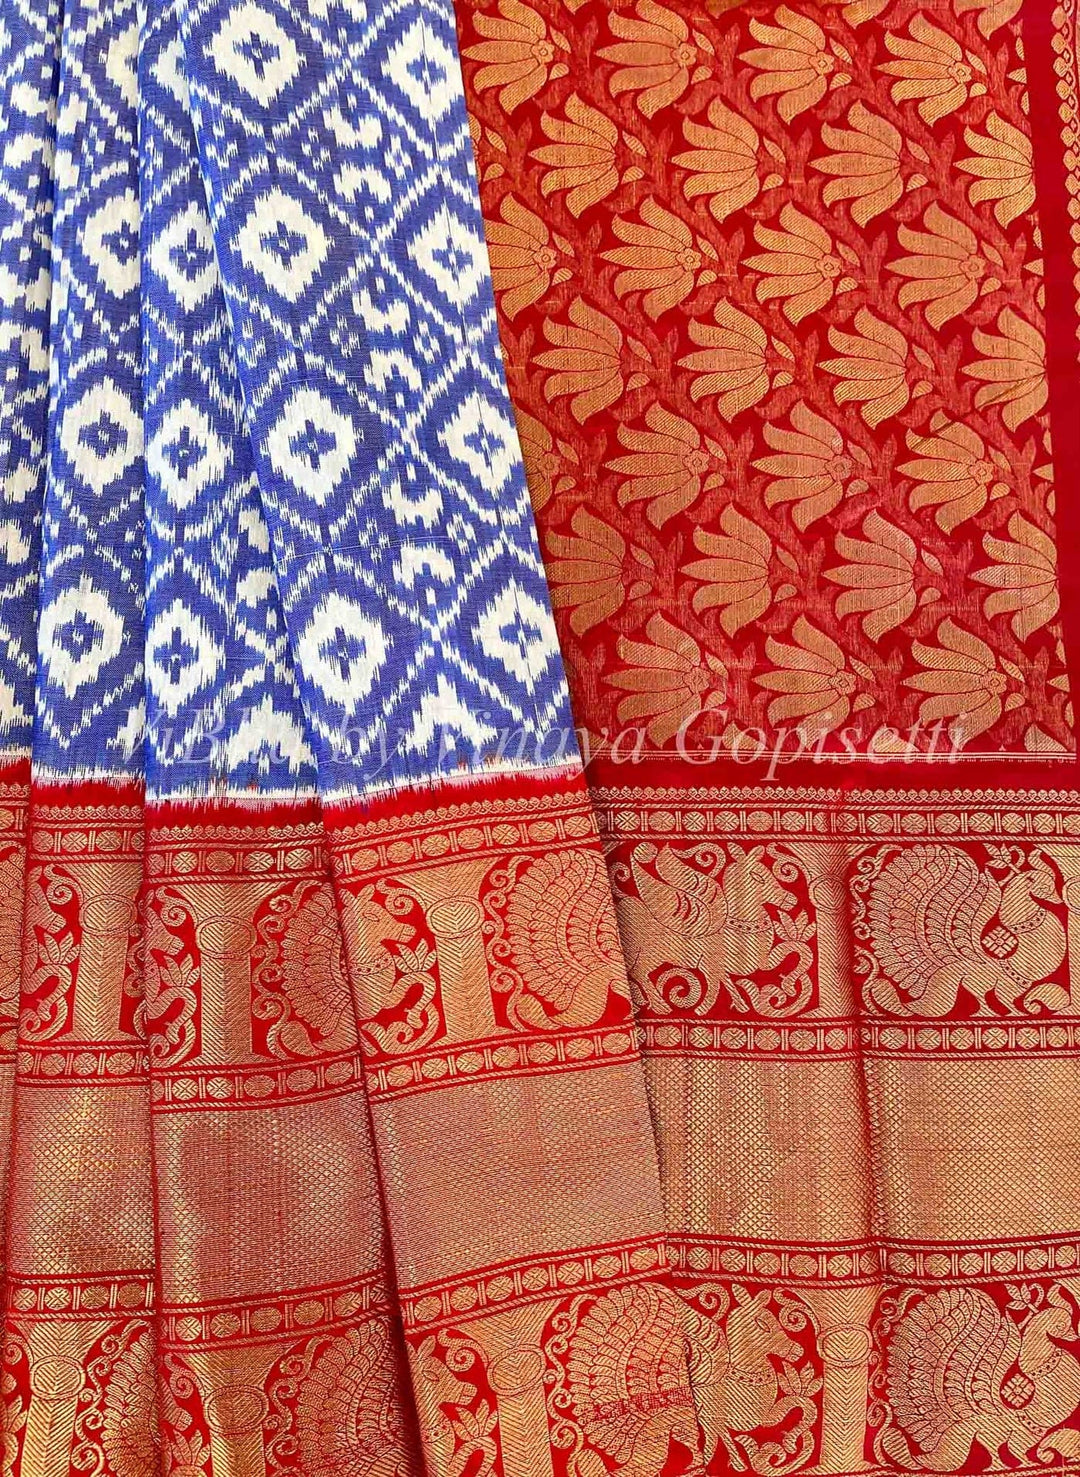 Light Purple and Red Ikkat Silk Saree with Kanchi borders and Blouse. 